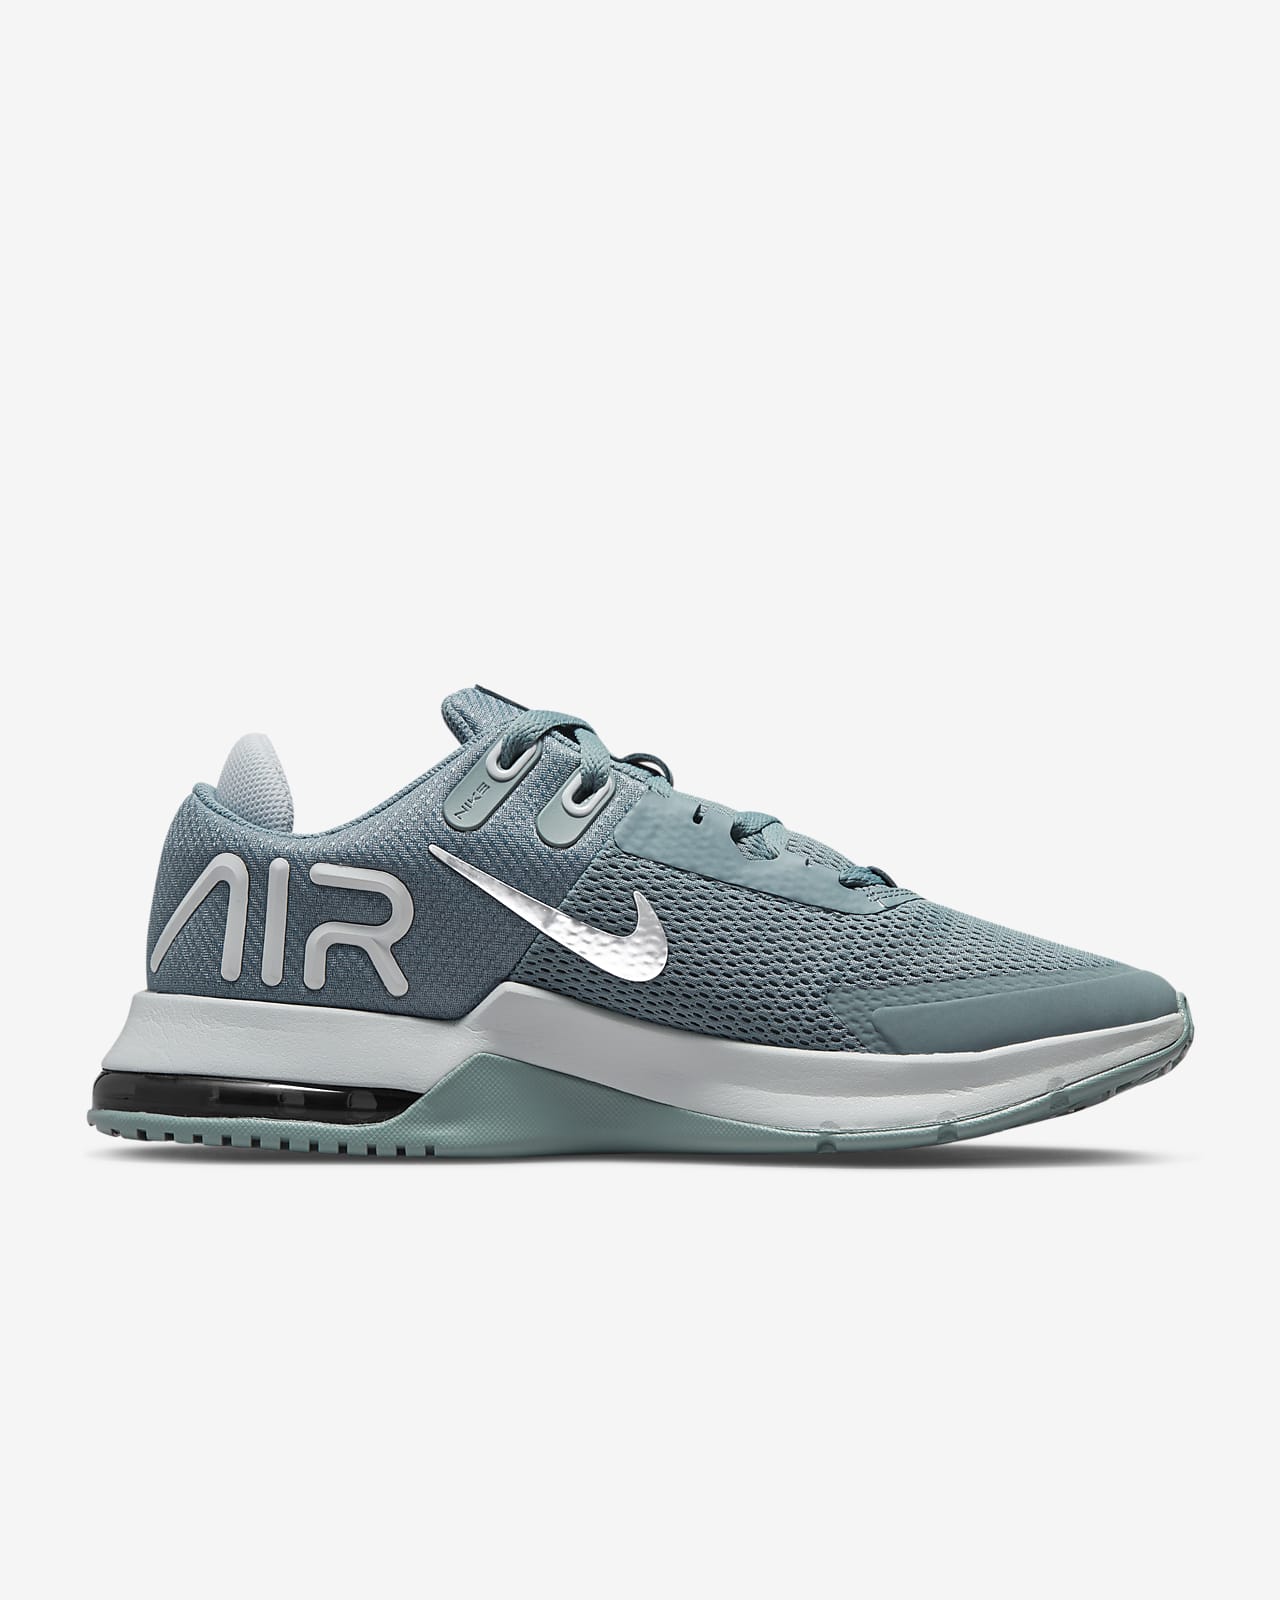 Air Alpha Trainer Men's Shoes. Nike ID